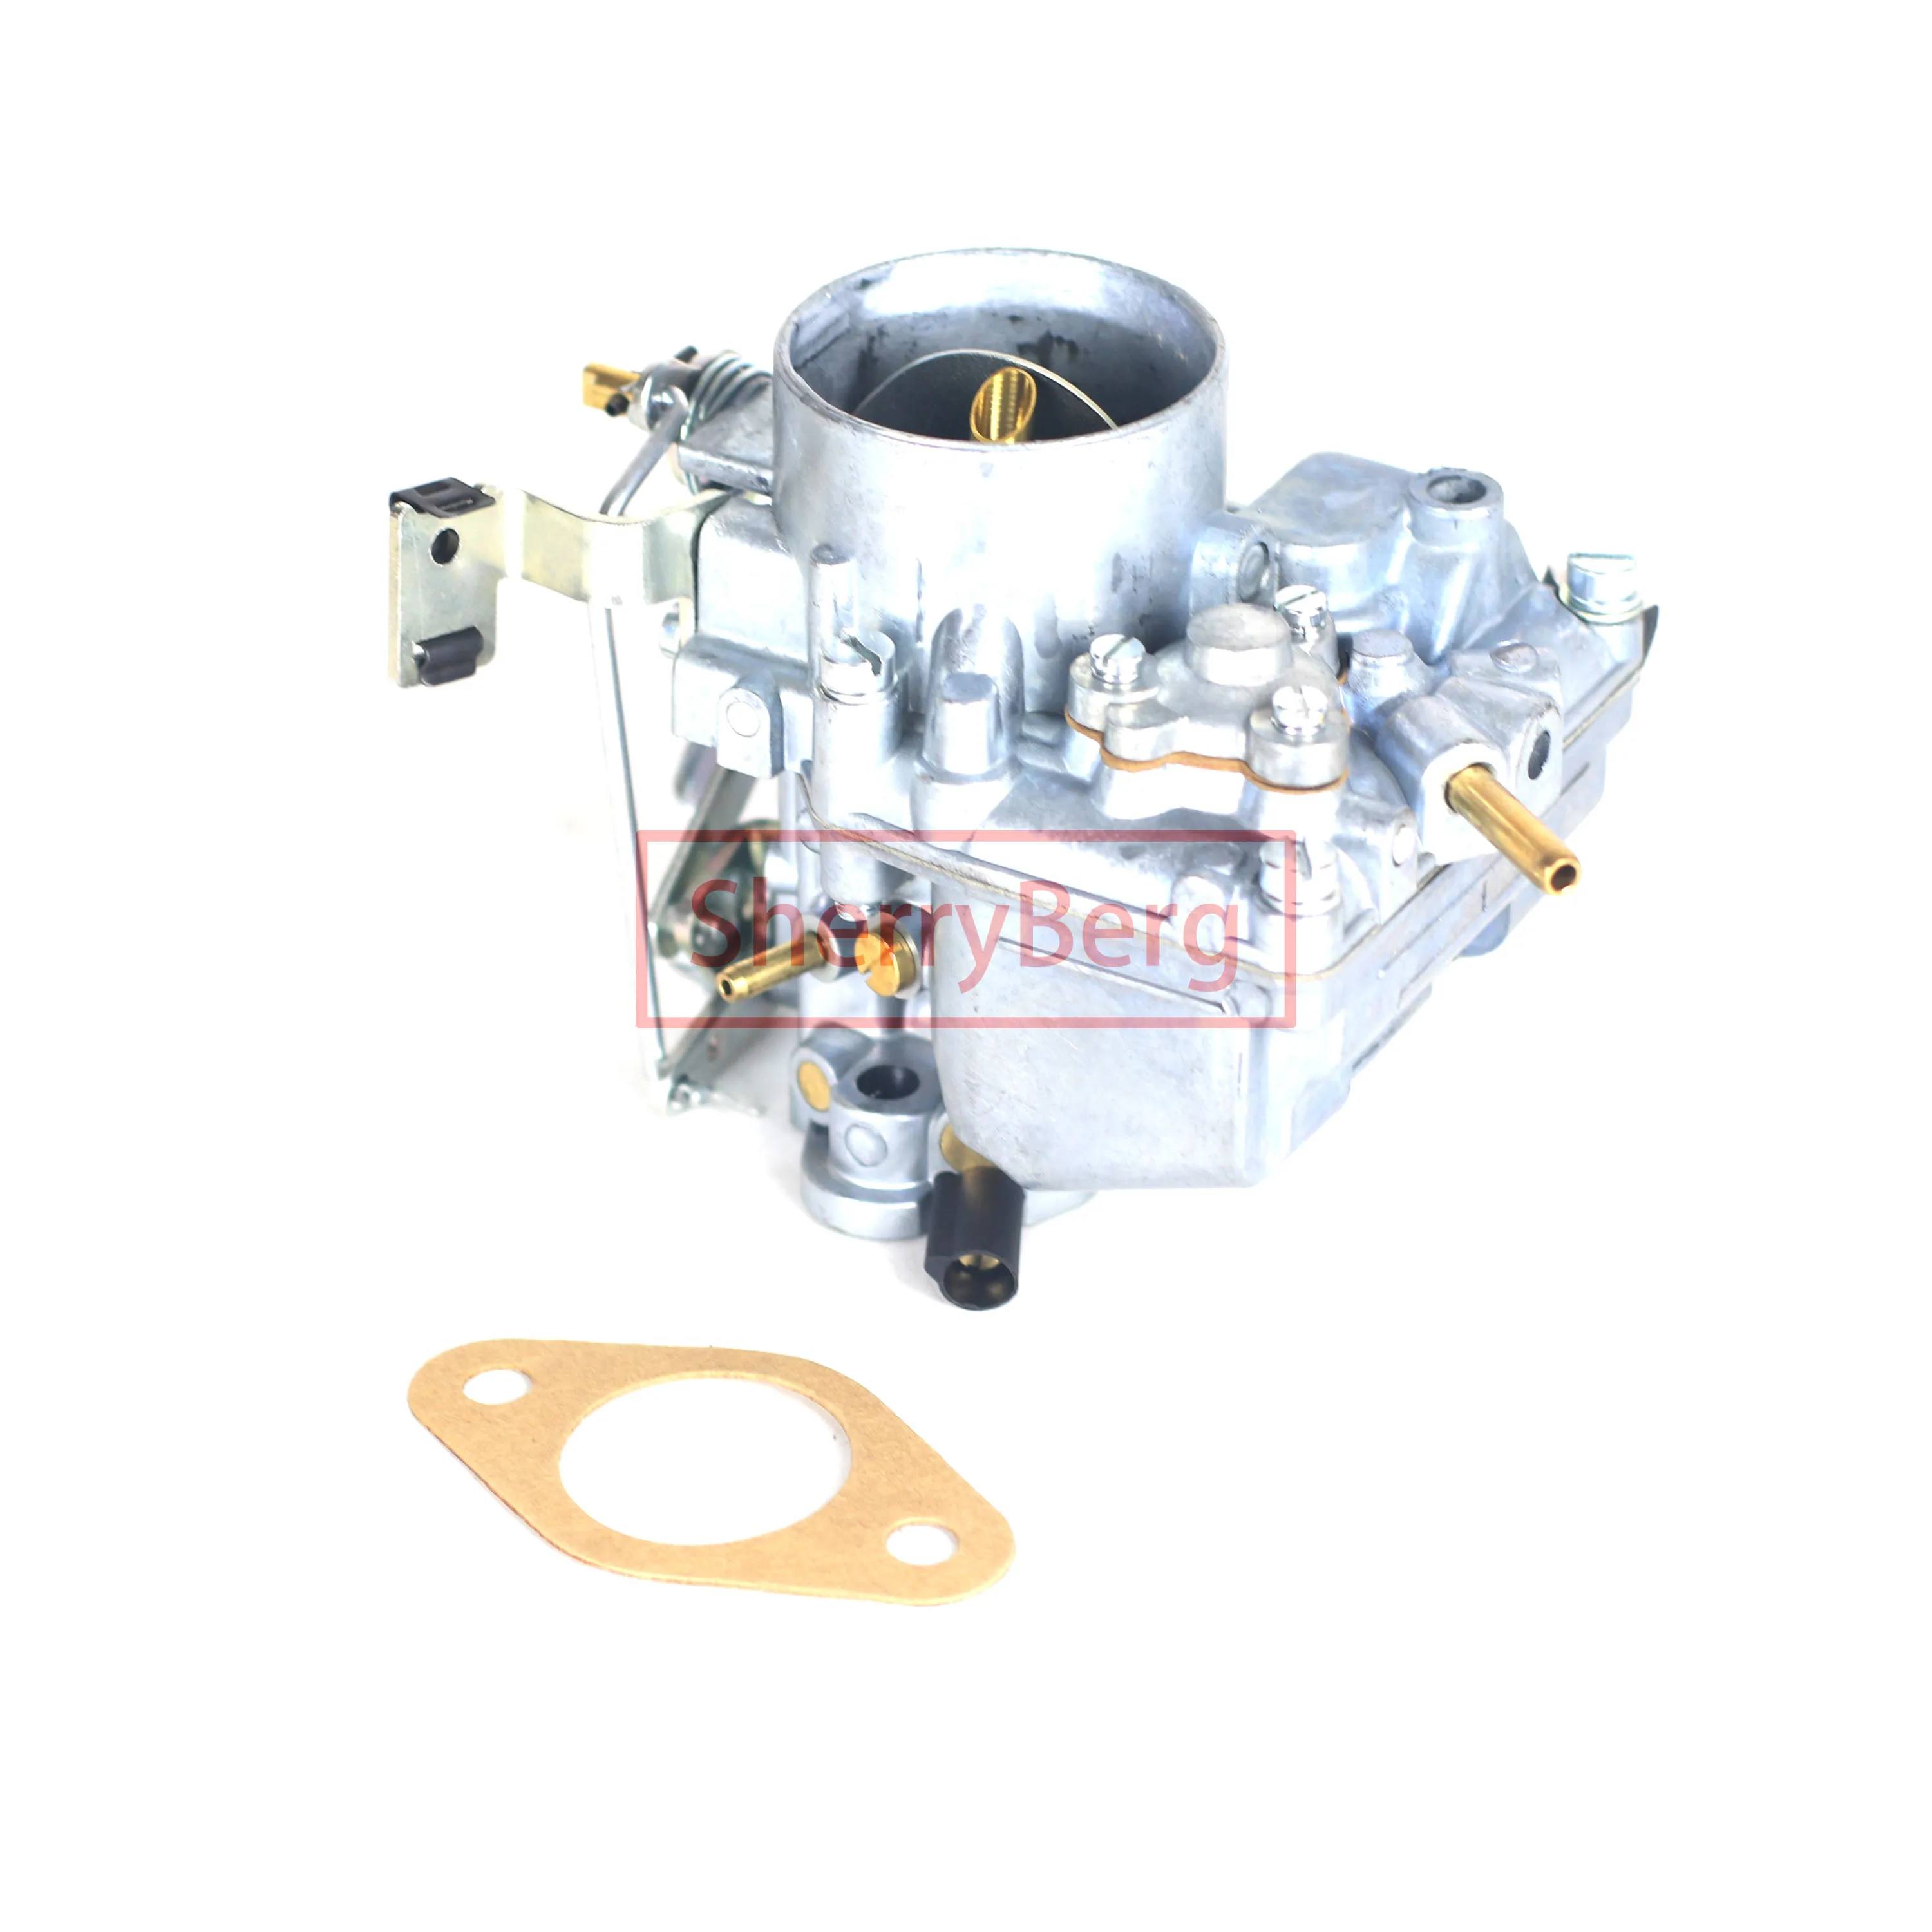 SherryBerg Carburetto Carby Carb Vergaser За SOLEX Zenith 36IV Карбуратор 2 1/4 2.25 Бензин за Land Rover Series 2,2a 3 Carbu Изображение 0